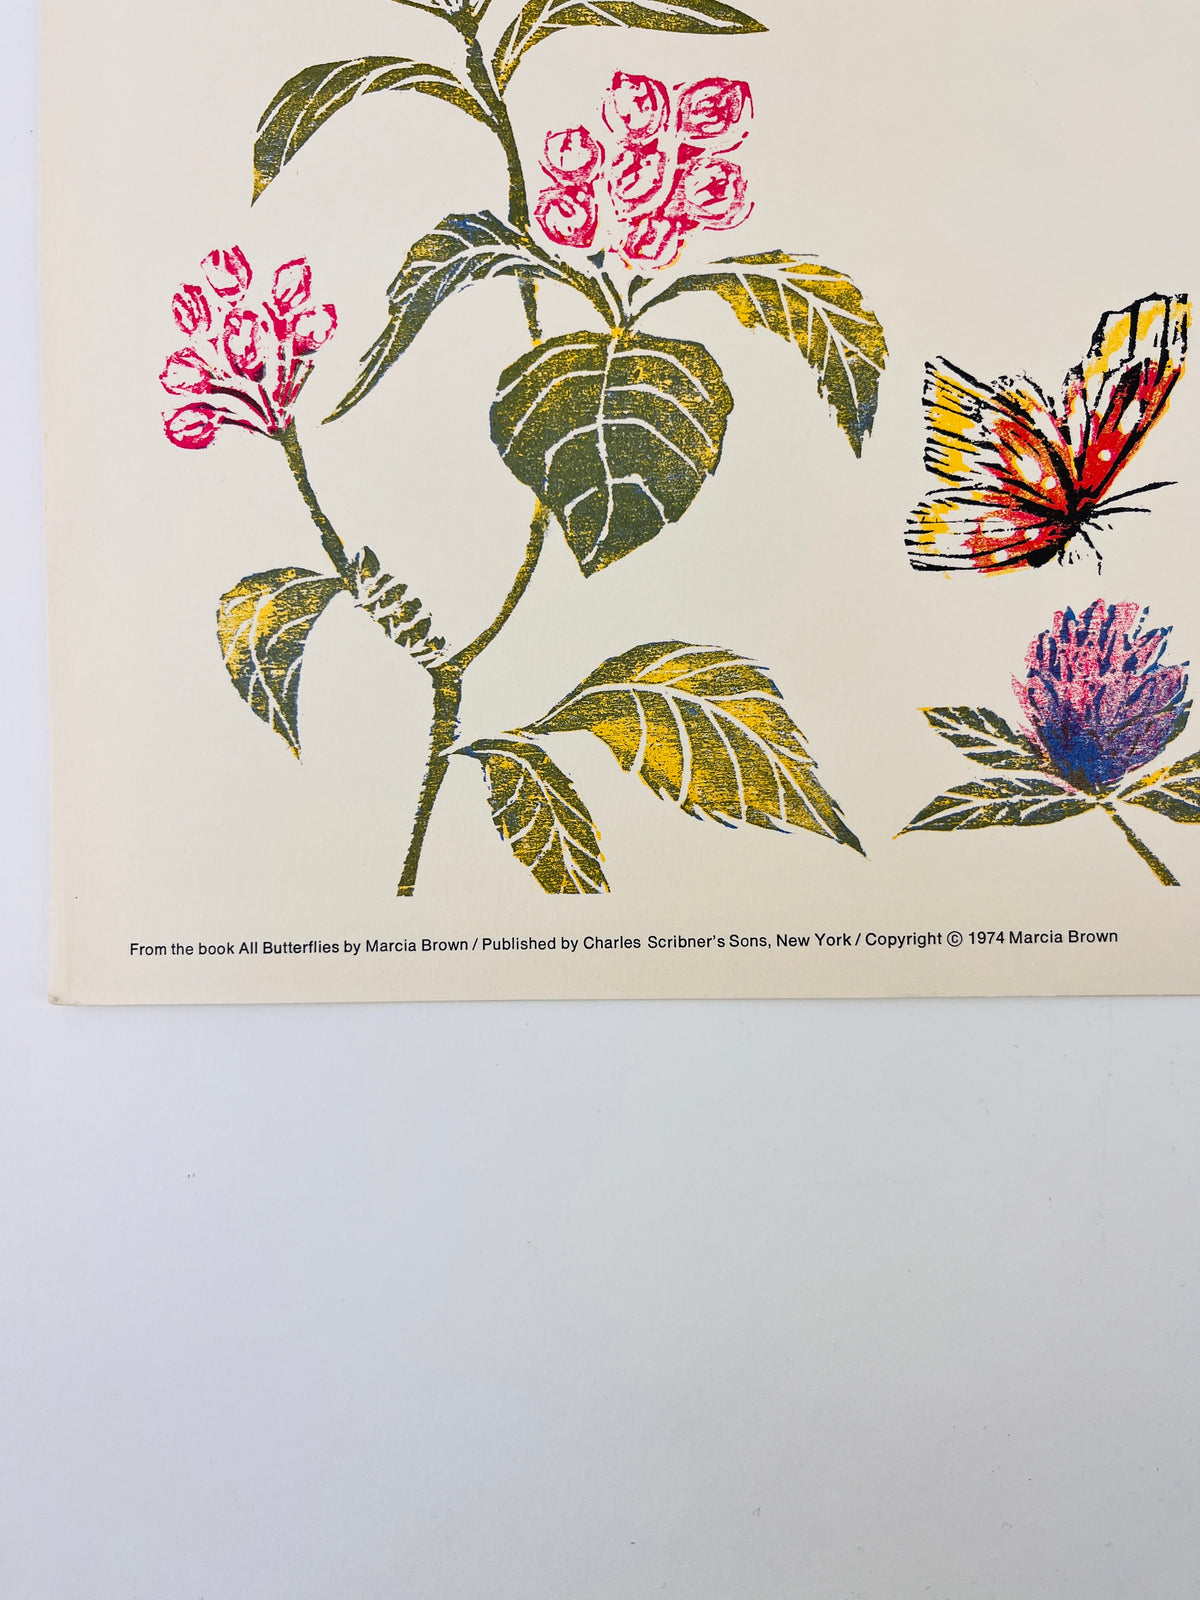 Vintage Butterflies & Flowers Lithograph by Marcia Brown, 1974